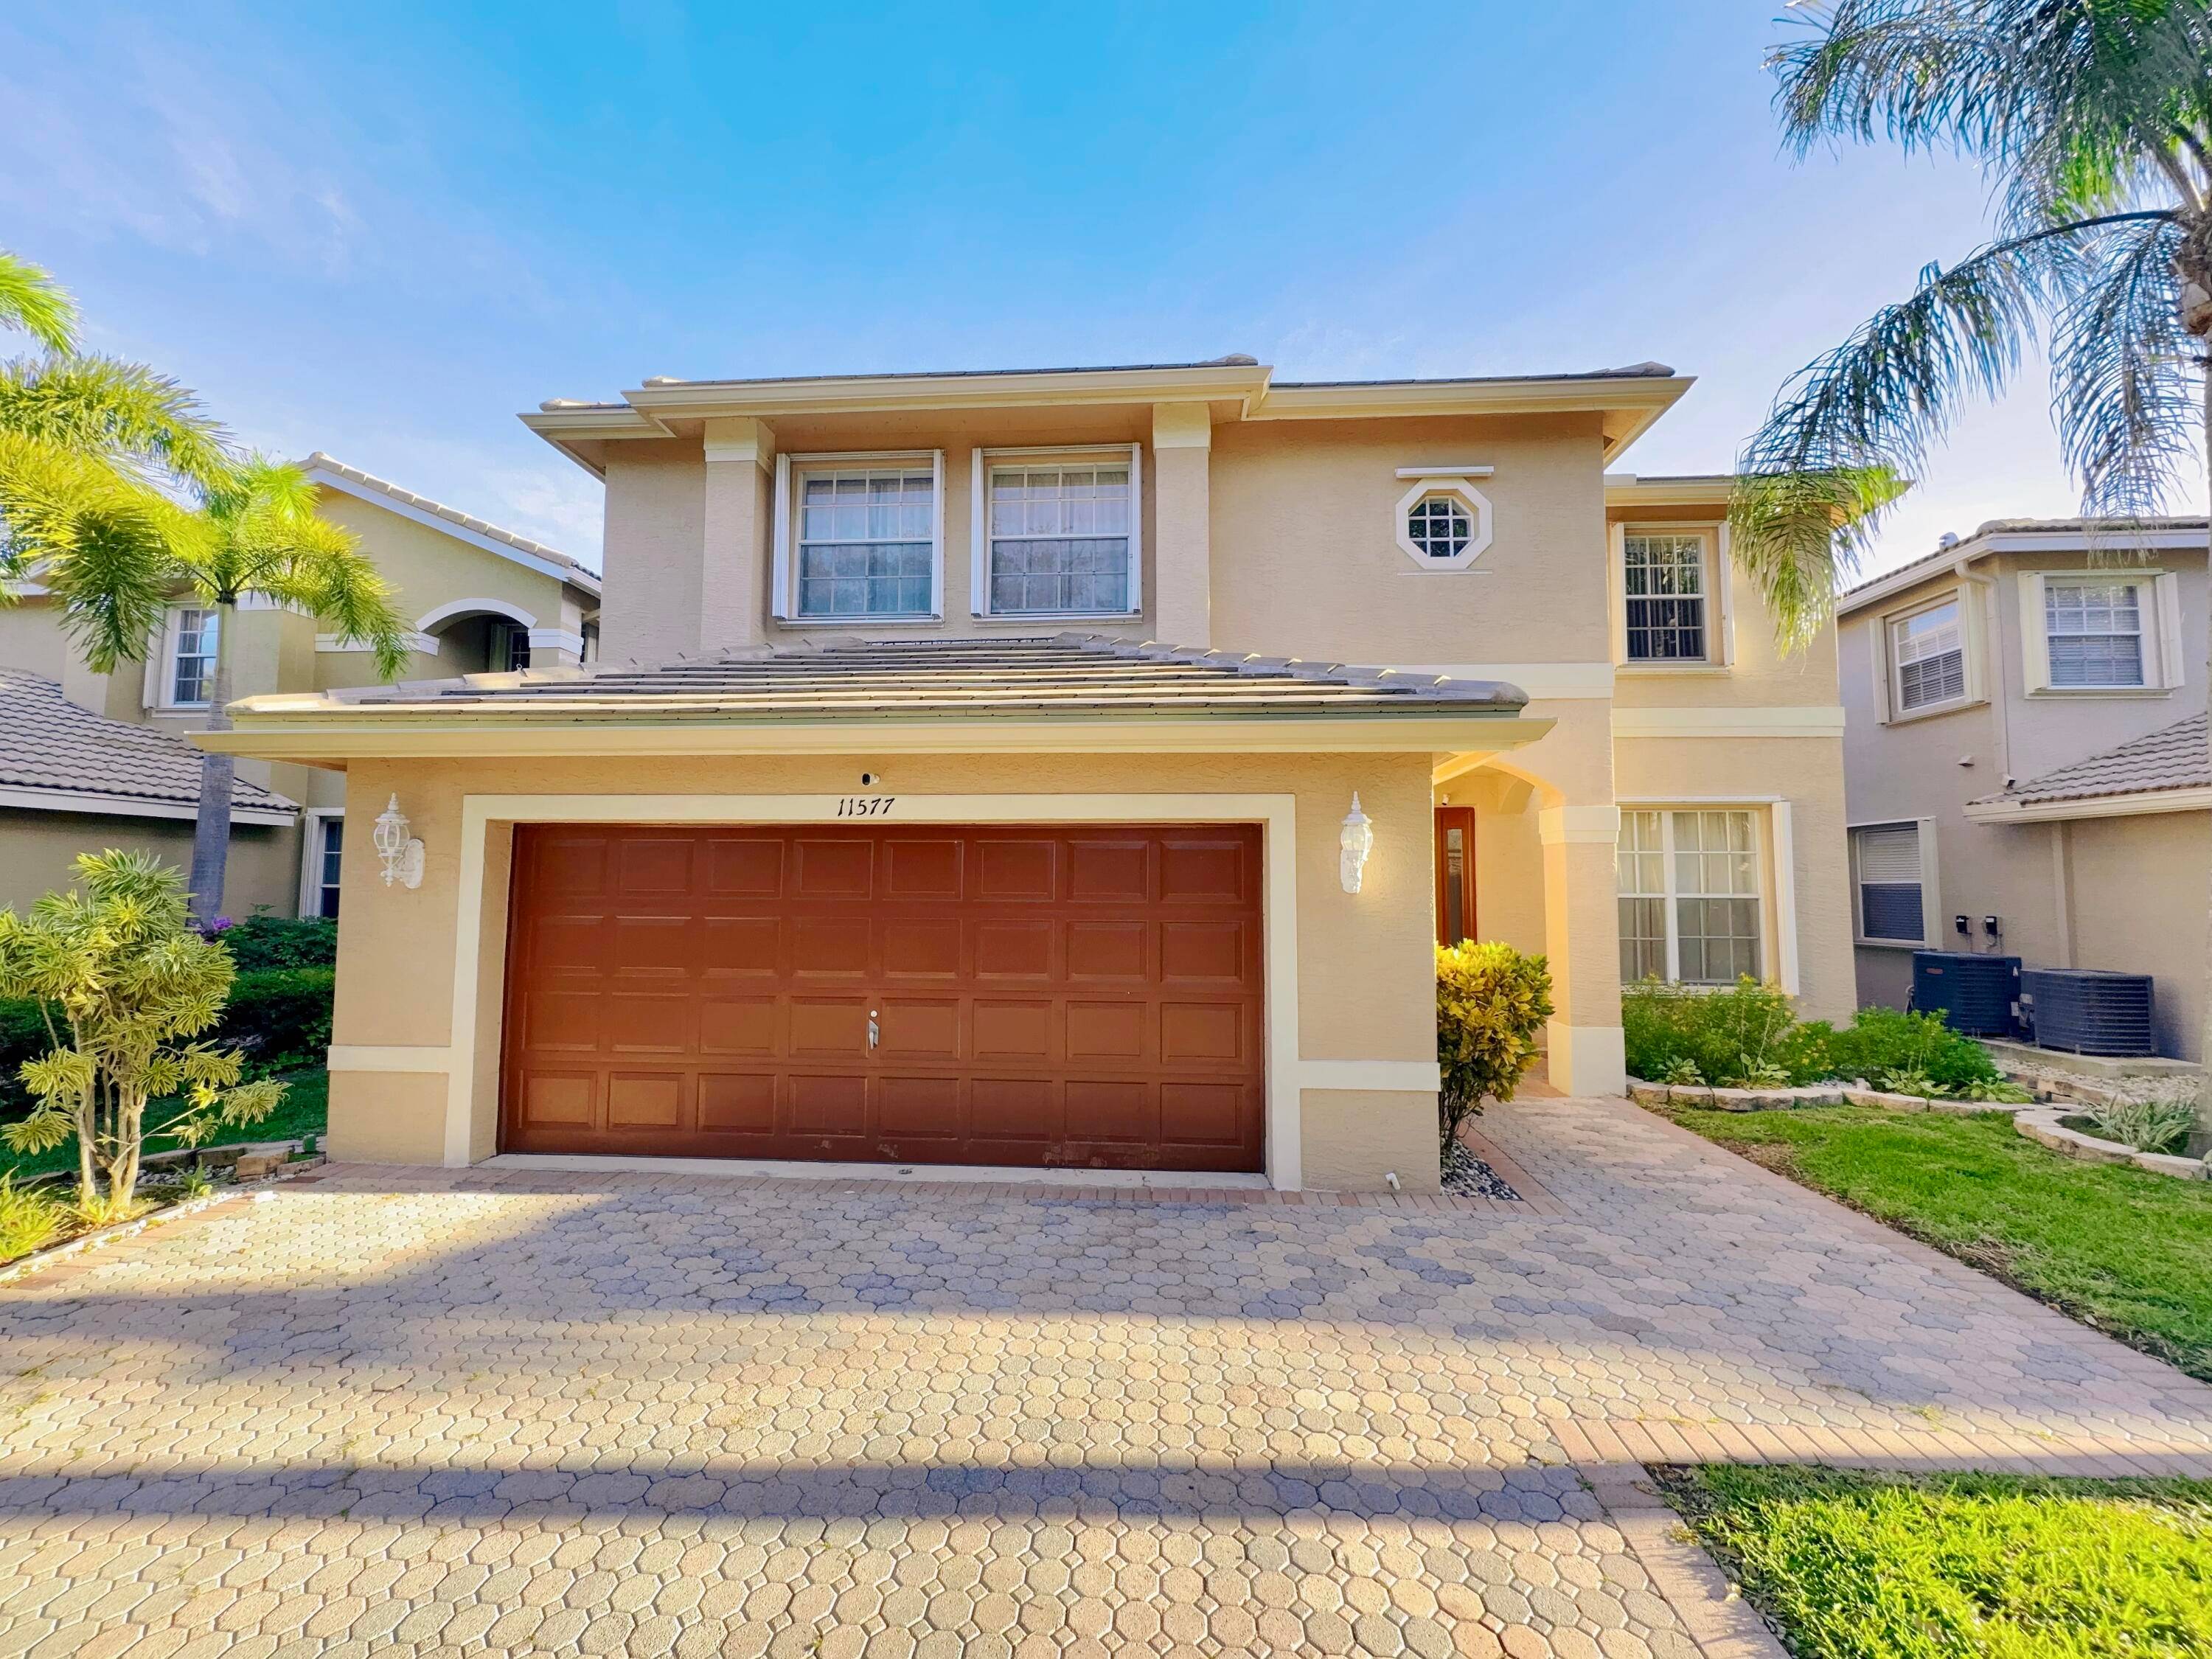 Ideally located in Boca Raton, highly desired neighborhood with A rated school zones.